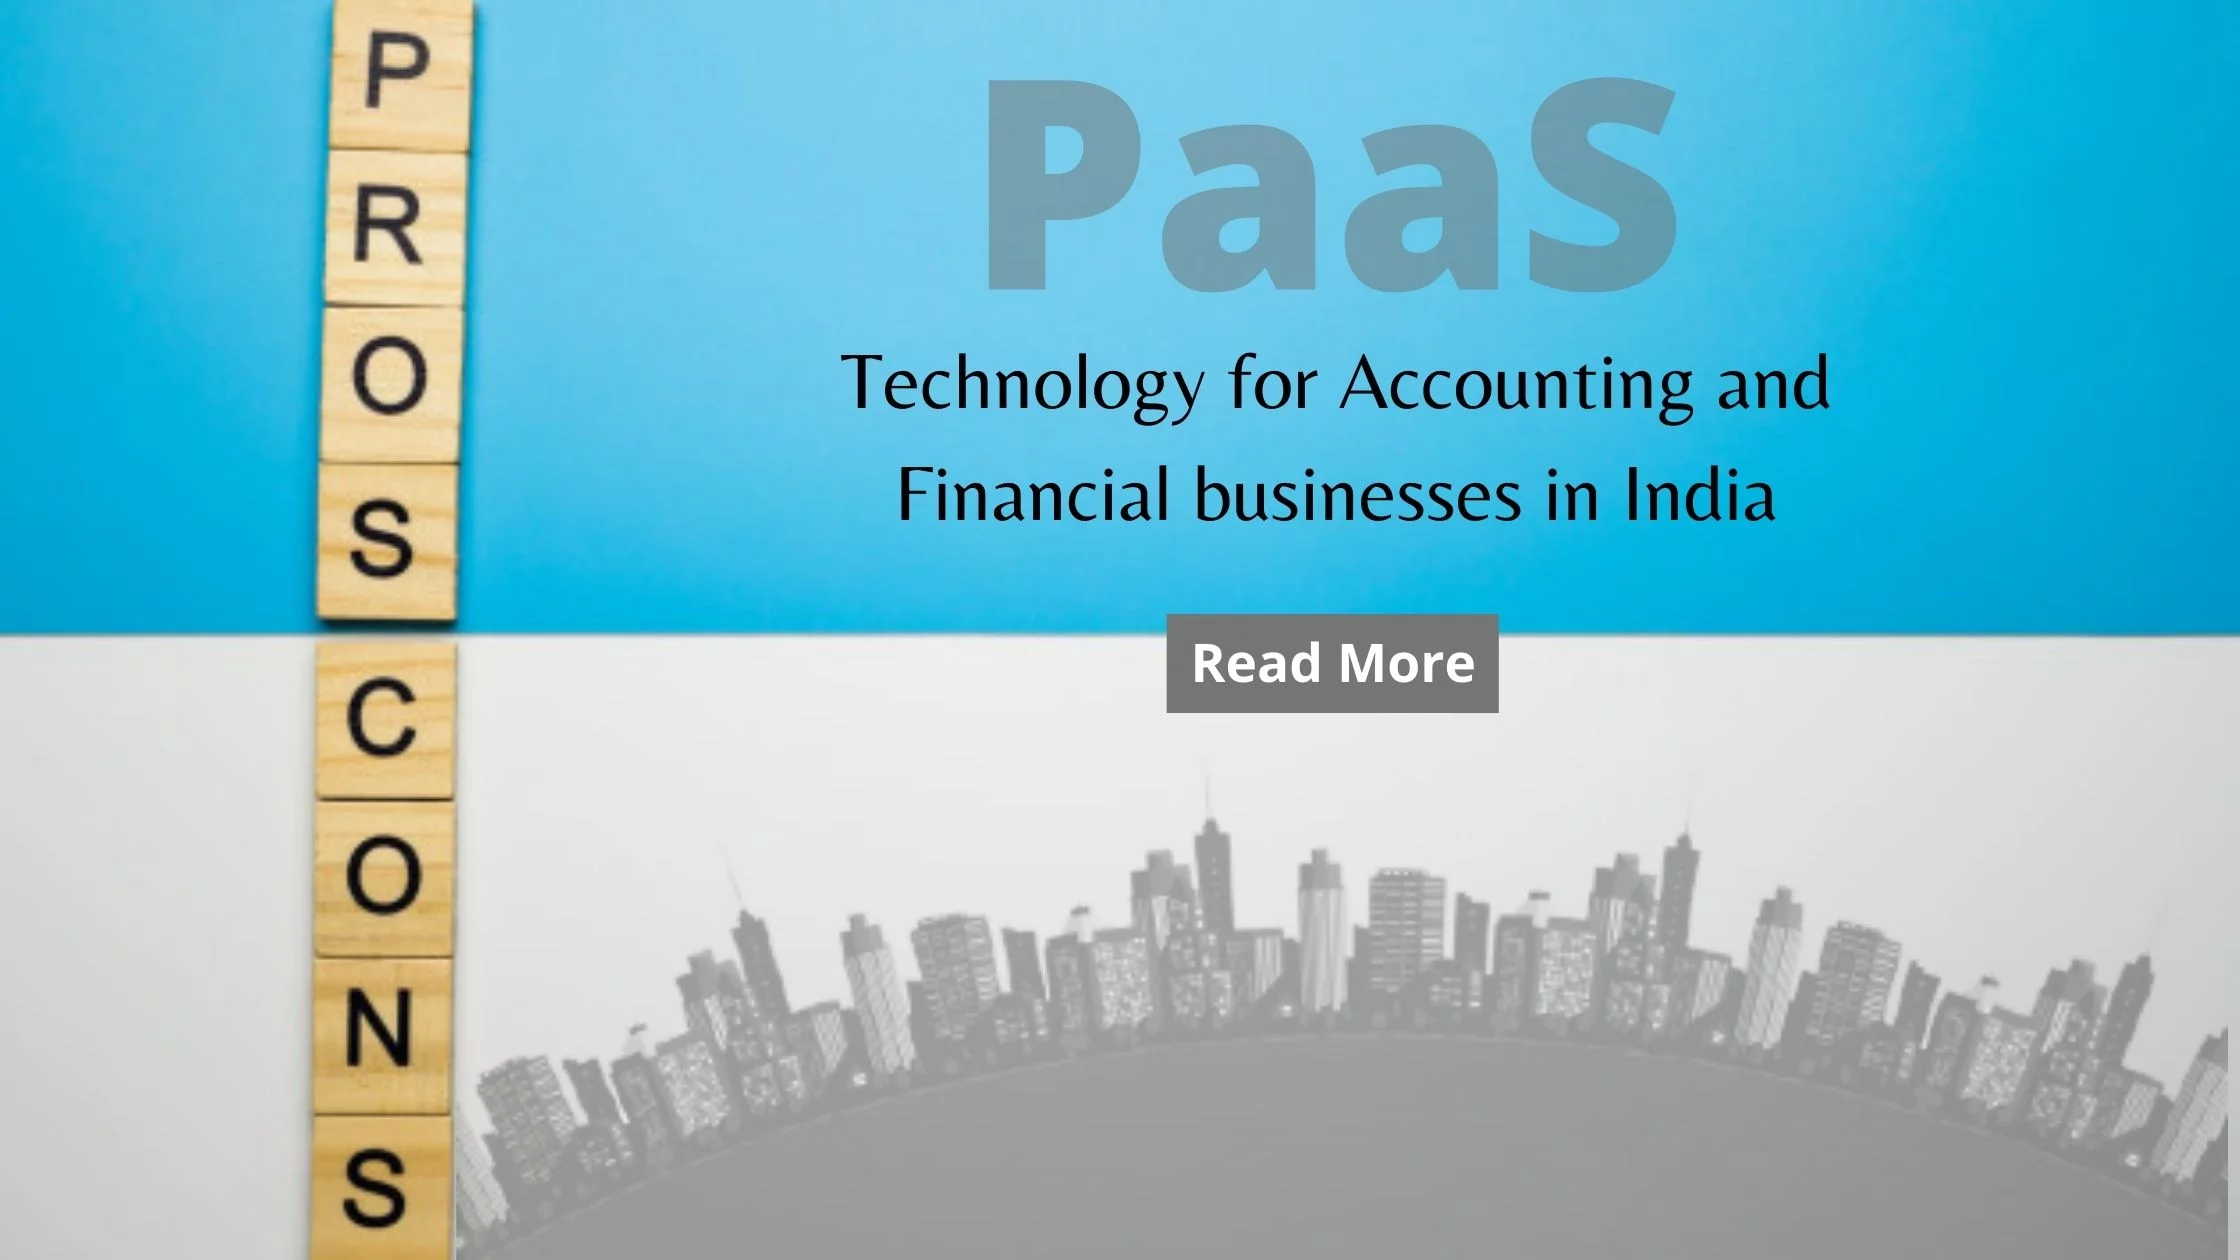 PAAS technology pros and cons